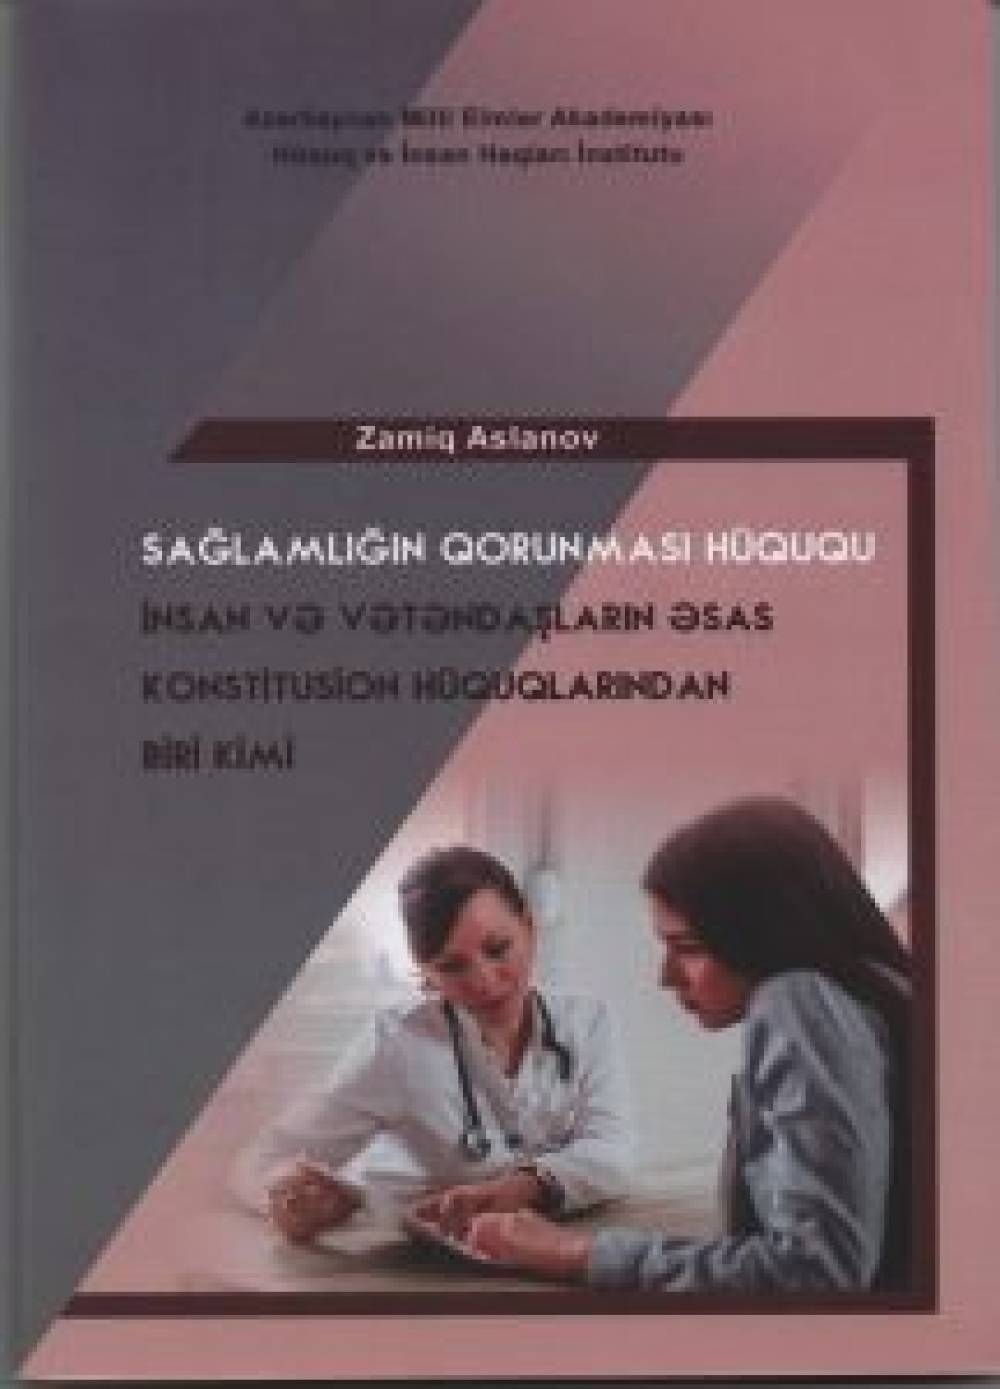 Zamig Aslanov: “The right to health care as one of the basic constitutional rights of people and citizens”   (monograph)